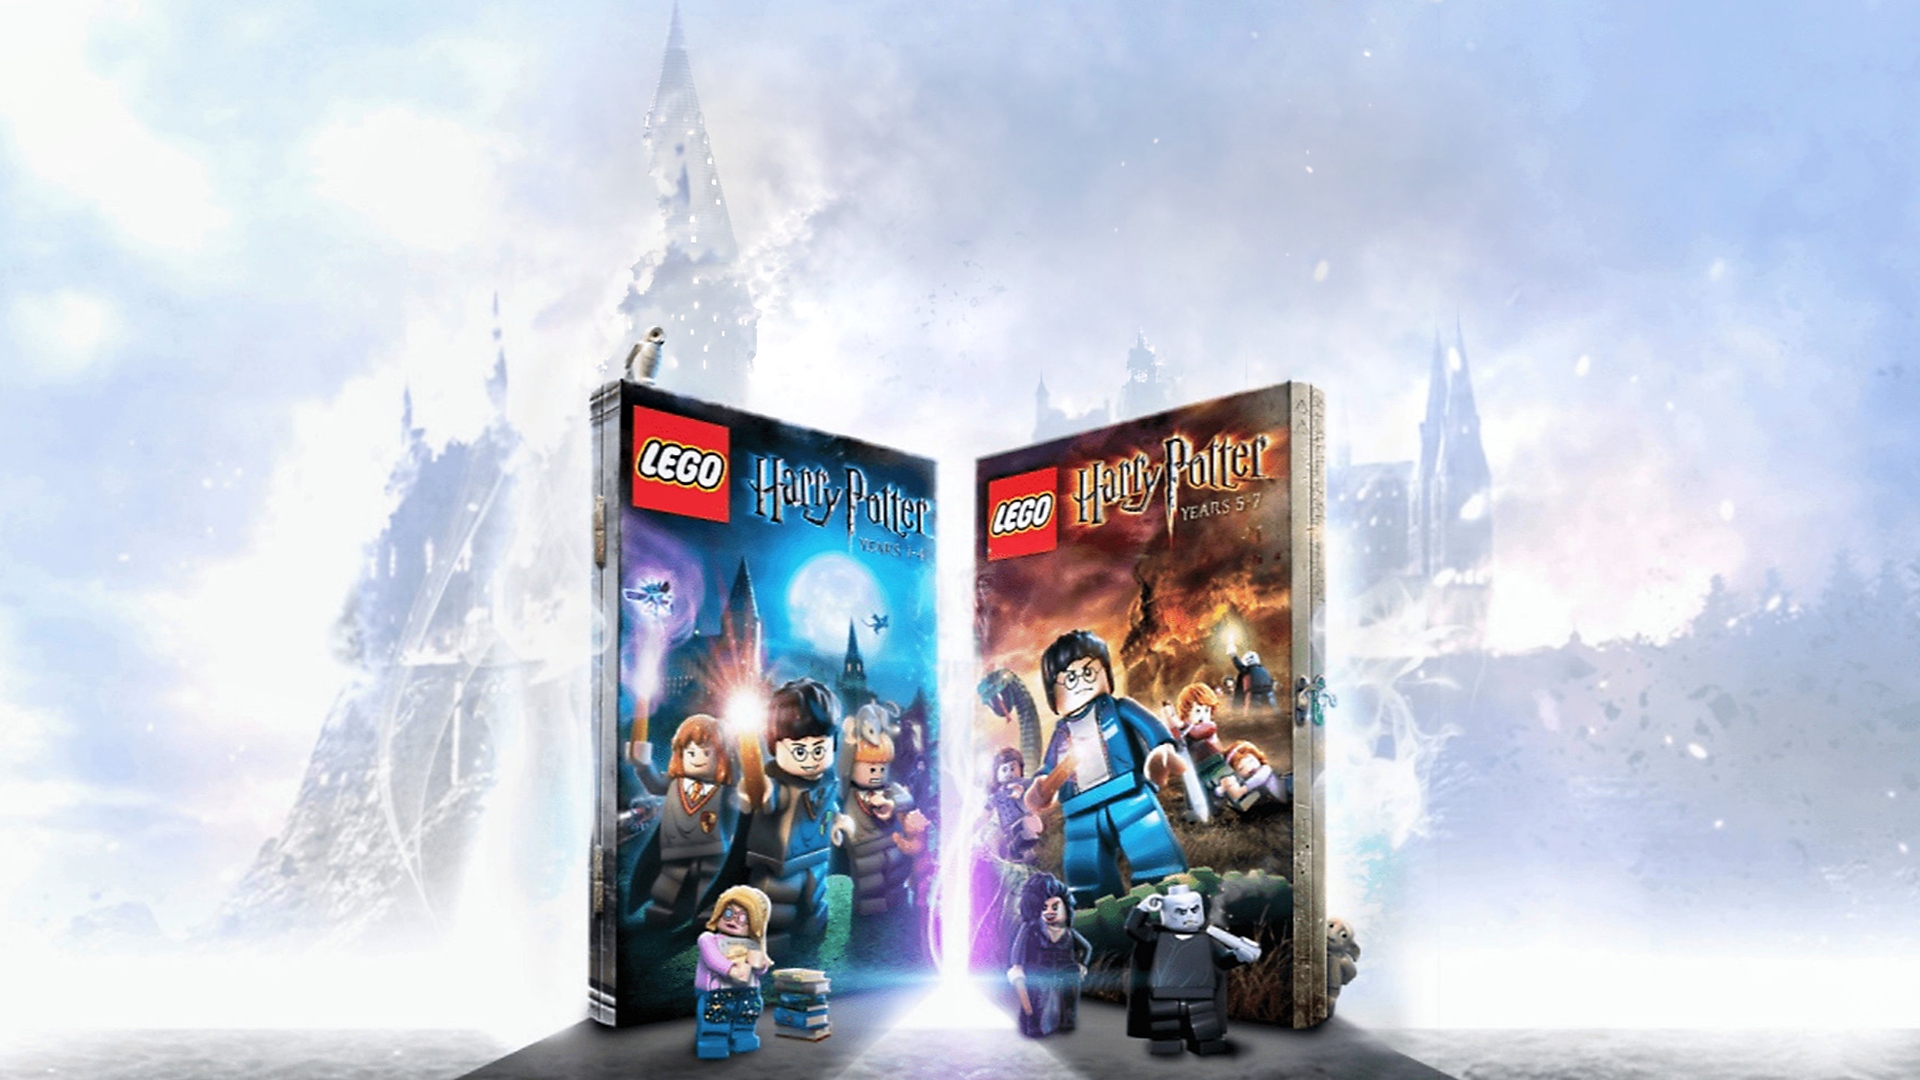 Covers for Lego Harry Potter Years 1-4 and 5-7 in front of Hogwarts Castle alongside Luna, Bellatrix and others